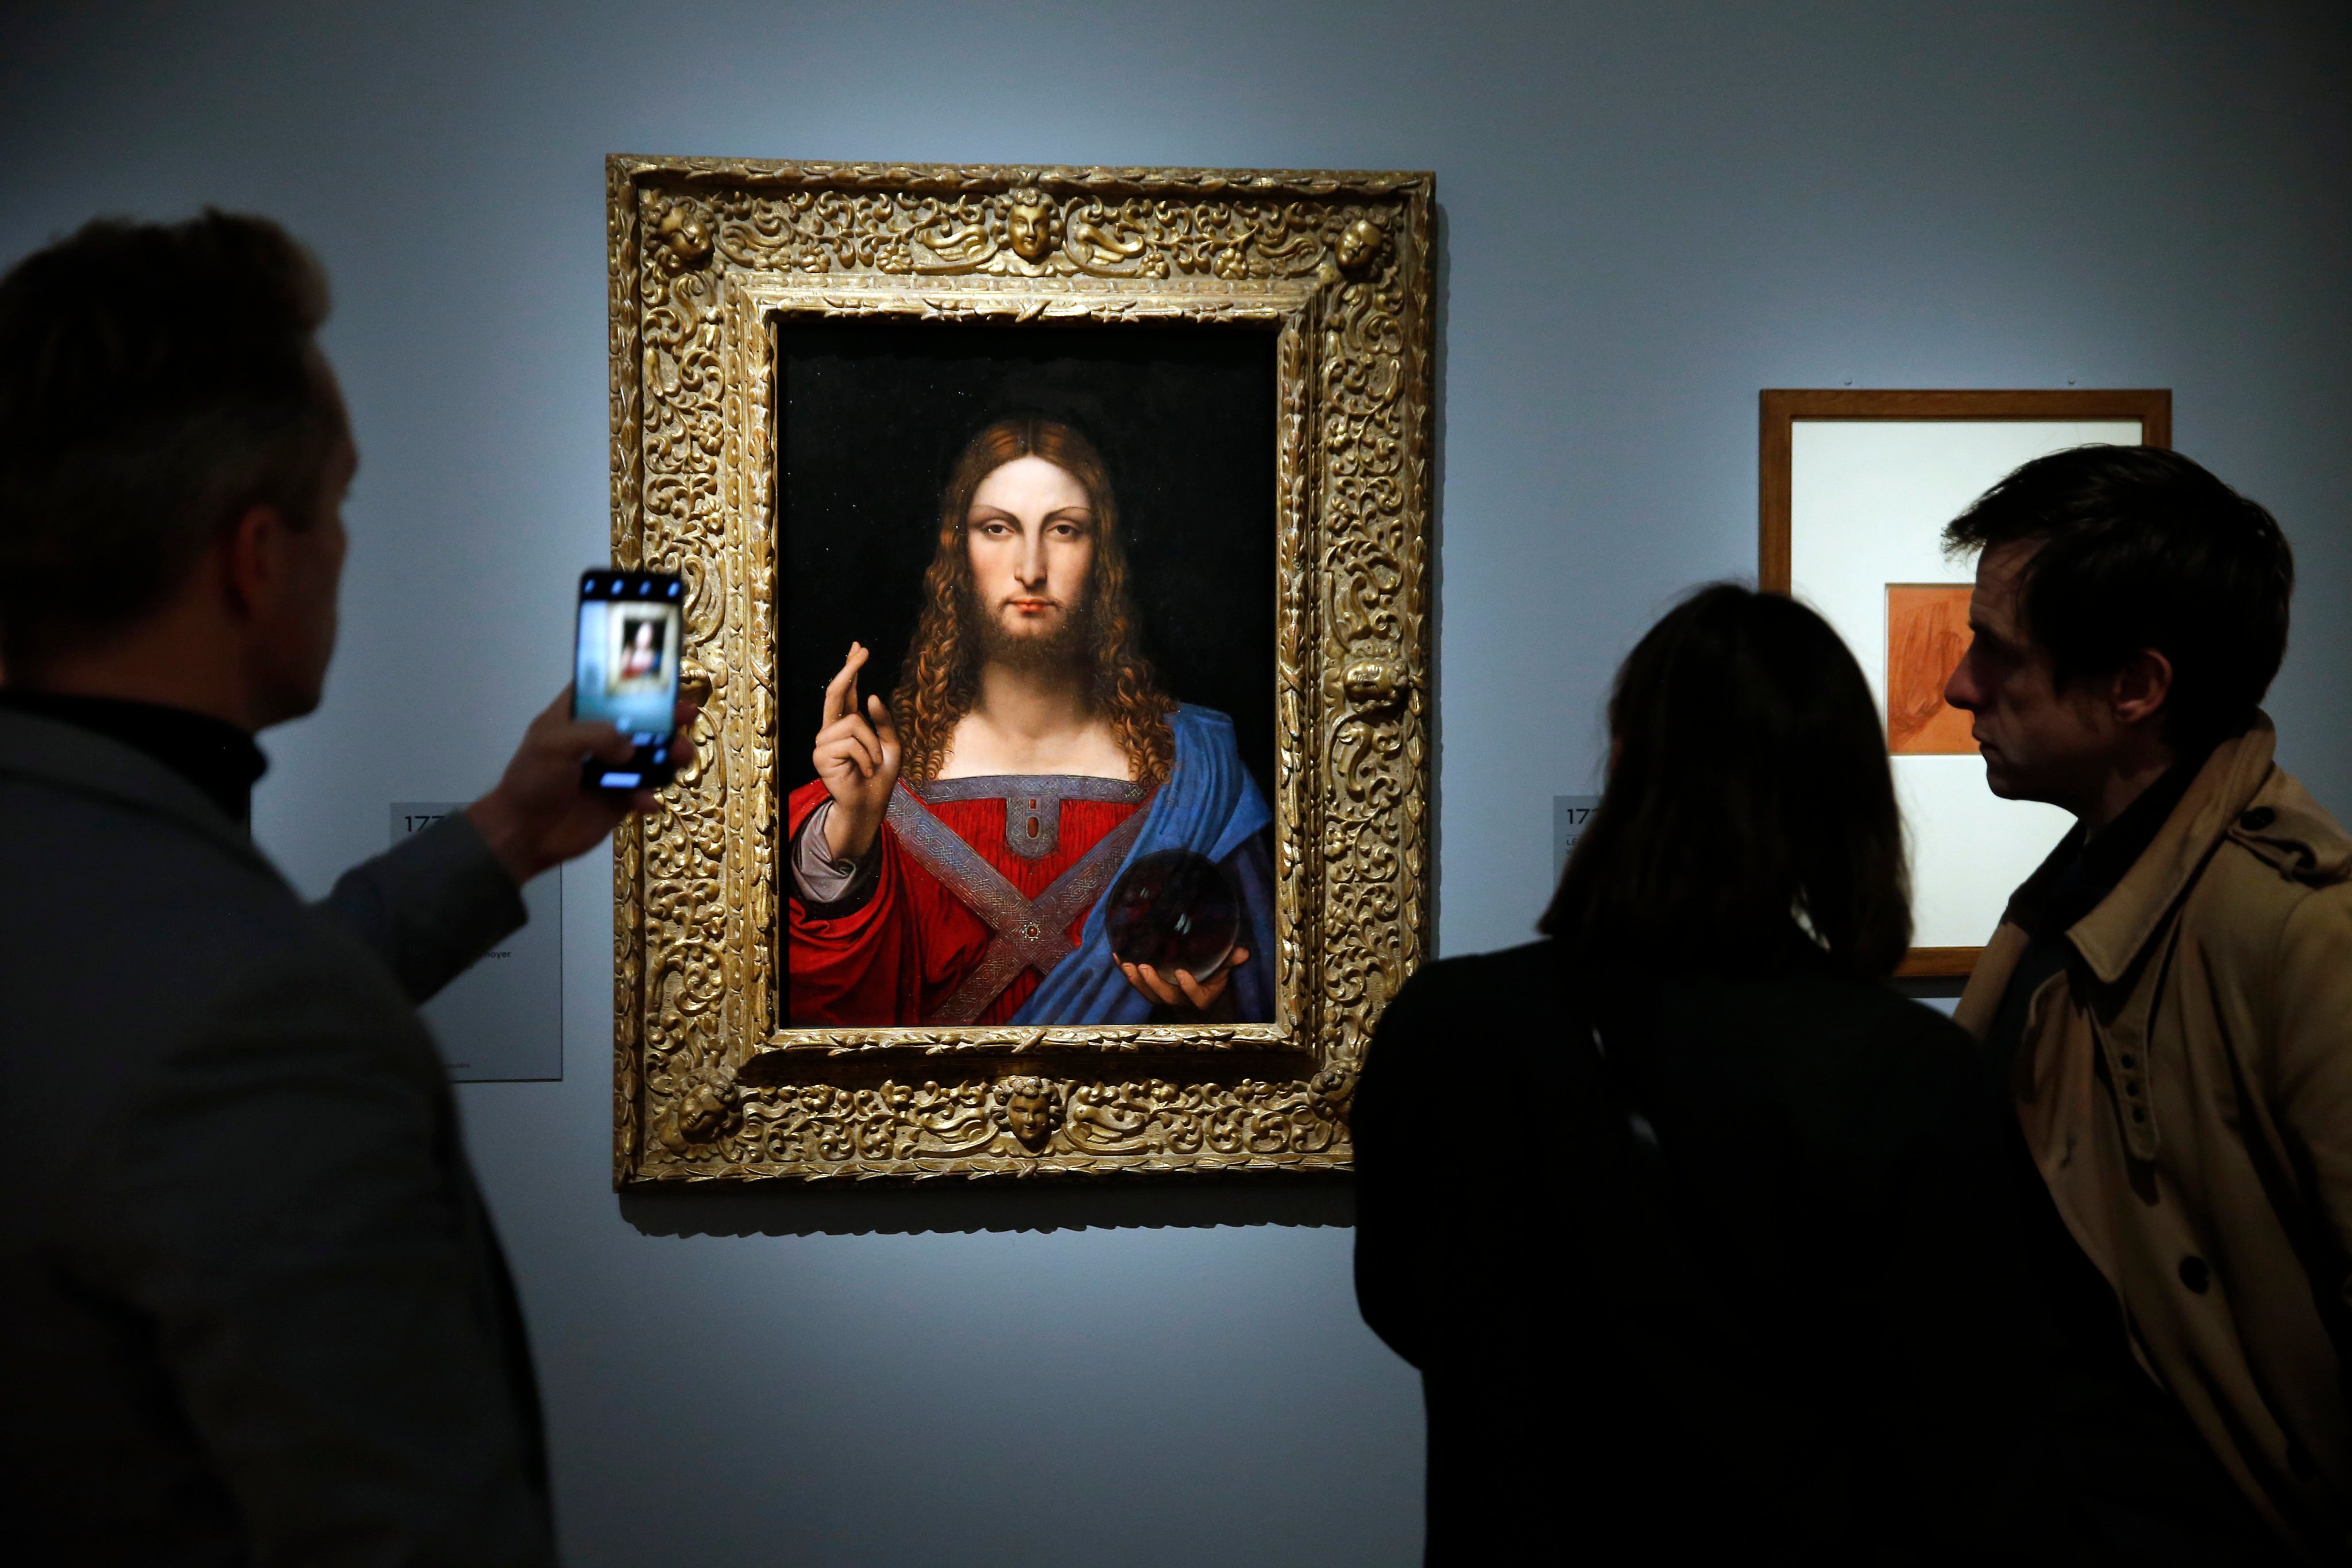 Visitors look at “Salvator Mundi” by Leonardo da Vinci at the Louvre museum on October 22, 2019 in Paris. France. The painting is among those that Russian billionaire Dmitry Rybolovlev claims he was defrauded over in a scheme involving auction house Sotheby’s and art broker Yves Bouvier. Photo: Getty Images